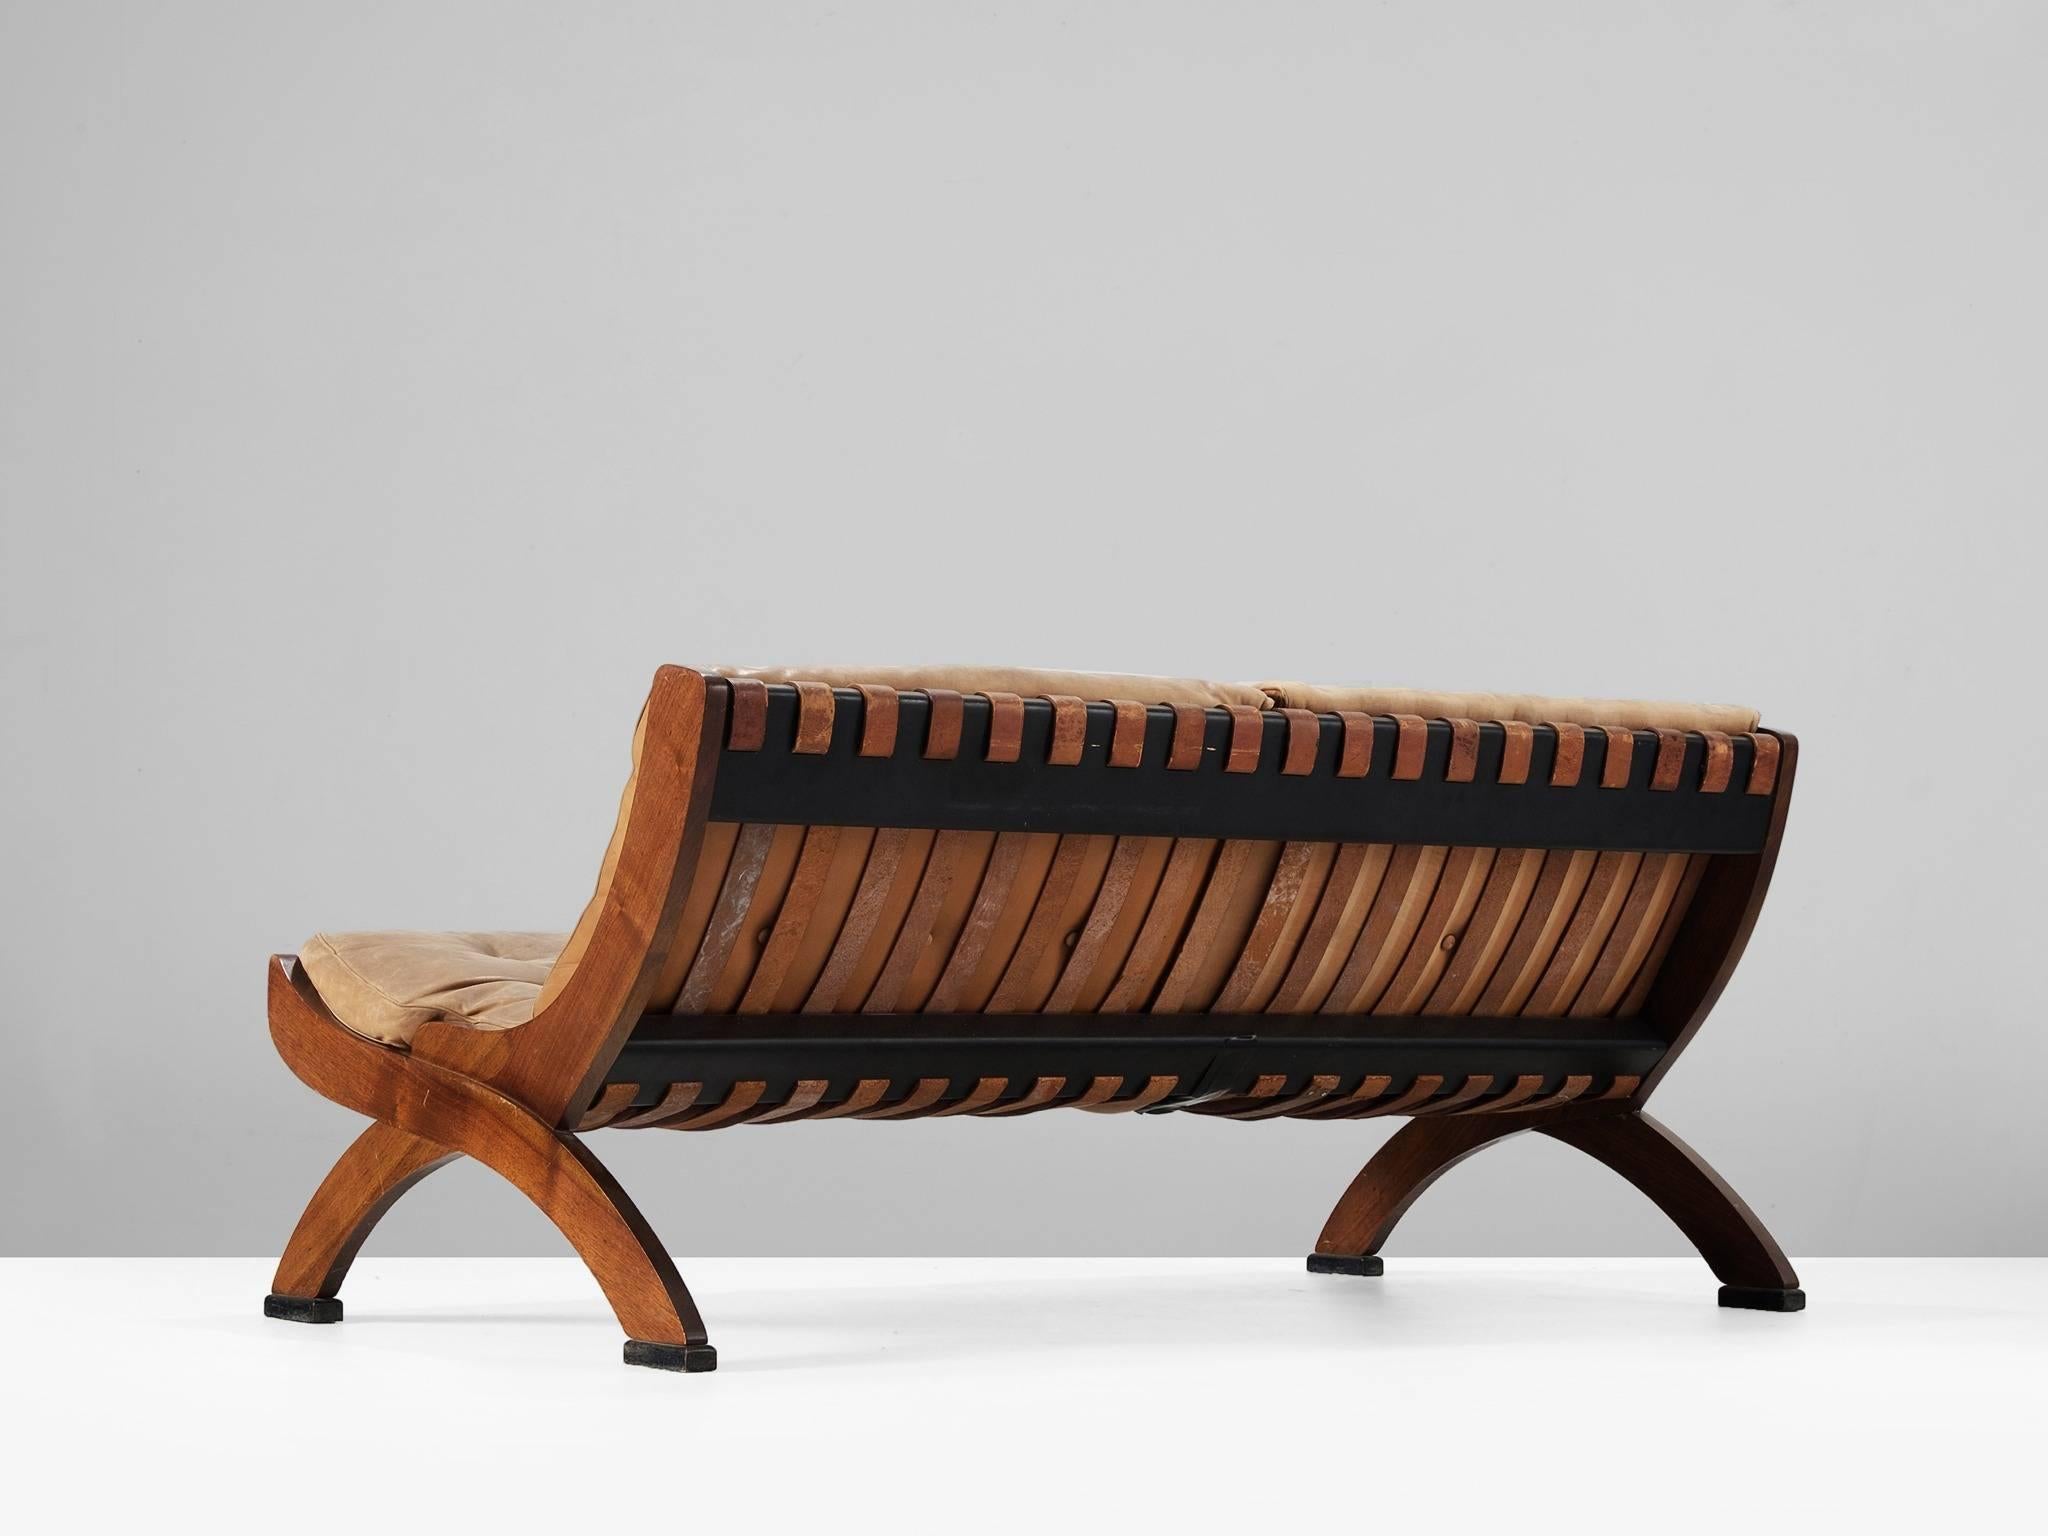 Marco Comolli for I.C.F. De Padova, settee, in walnut and leather, by Italy, 1960s. 

This wonderfully aged sofa has a beautiful all-over patina. Highly comfortable due to down filling and well-designed proportions. The back shows nice cognac